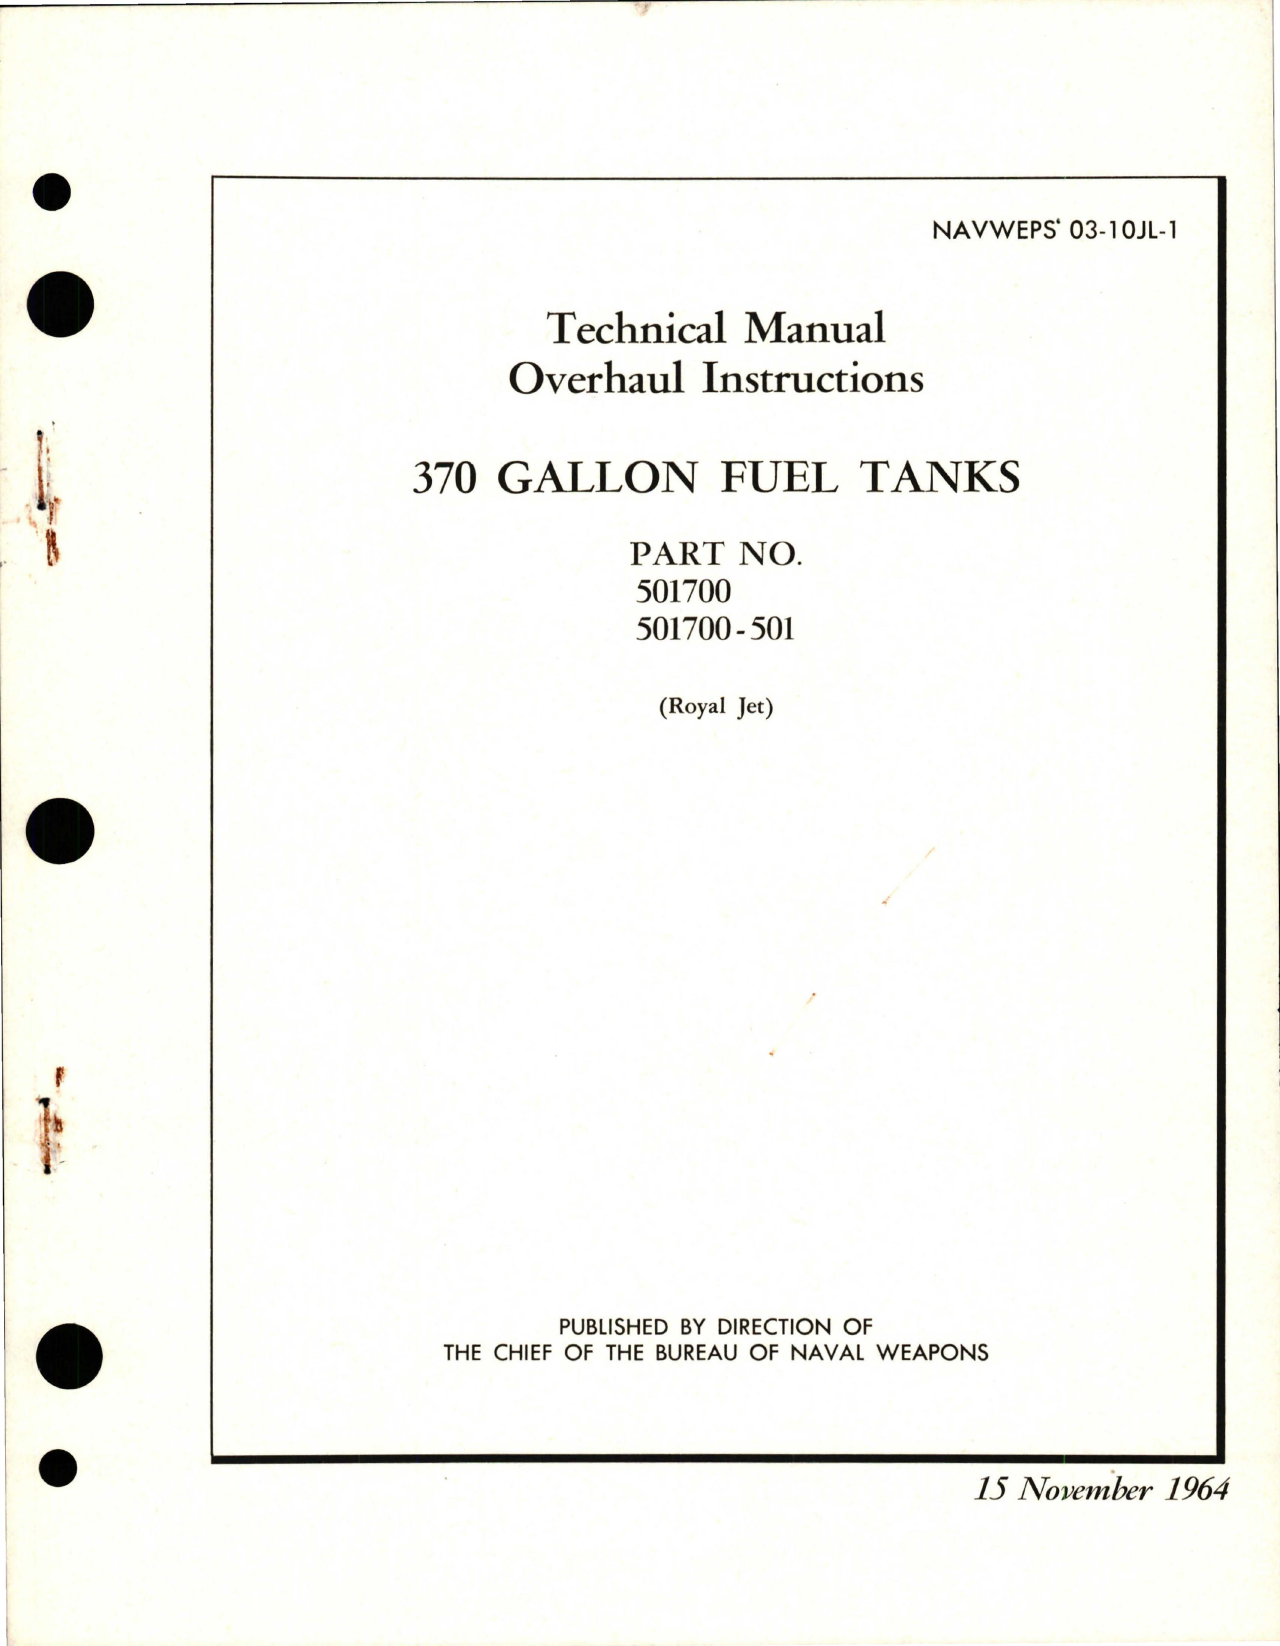 Sample page 1 from AirCorps Library document: Overhaul Instructions for Fuel Tanks - 370 Gallon - Parts 501700 and 501700-501